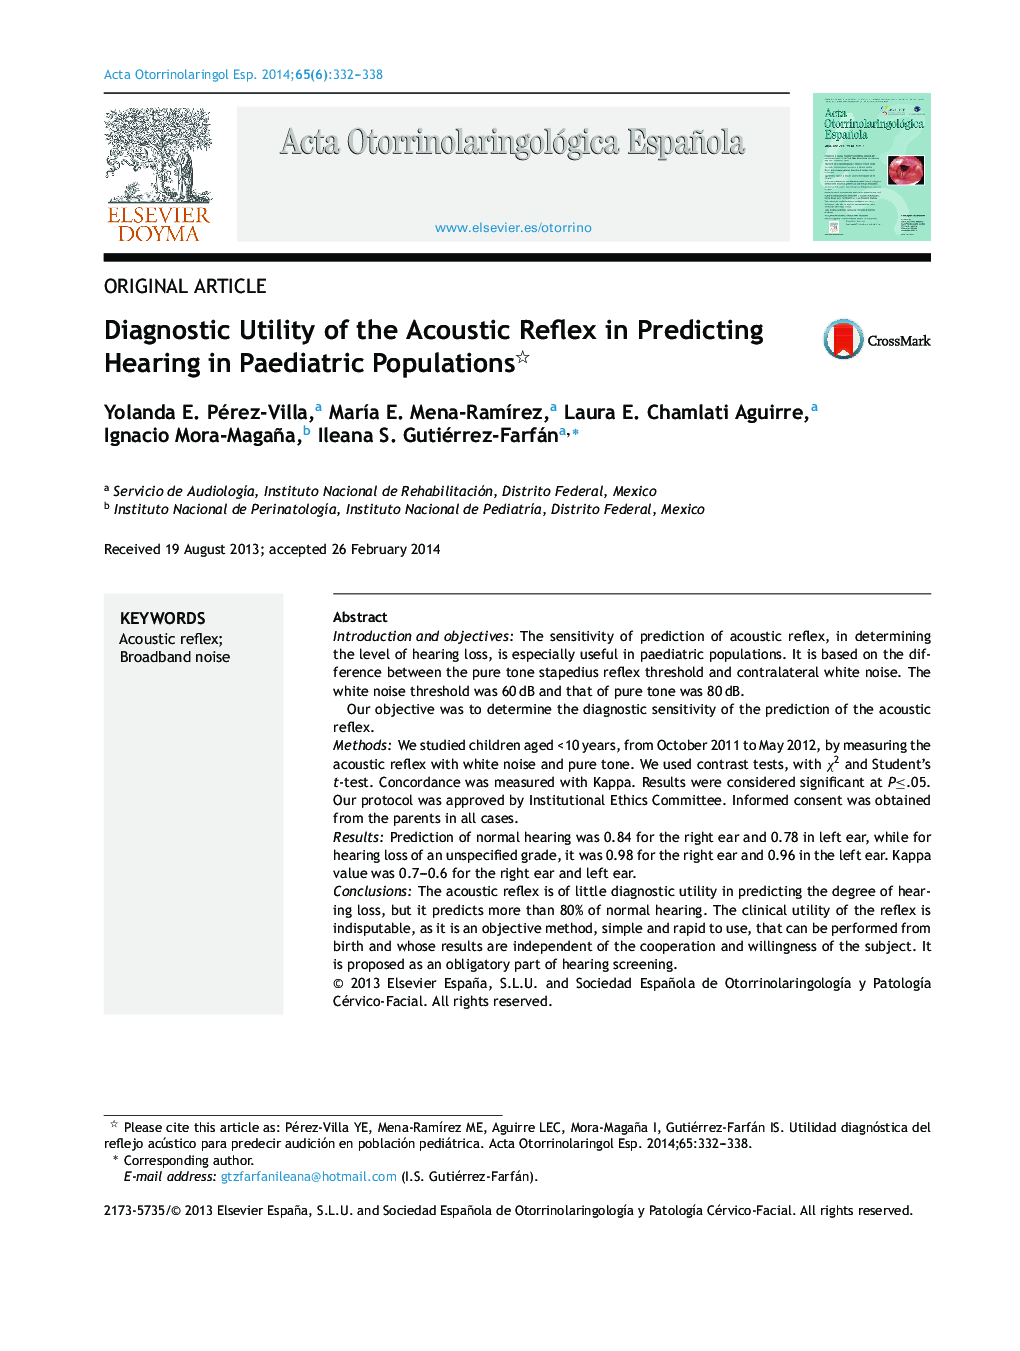 Diagnostic Utility of the Acoustic Reflex in Predicting Hearing in Paediatric Populations 